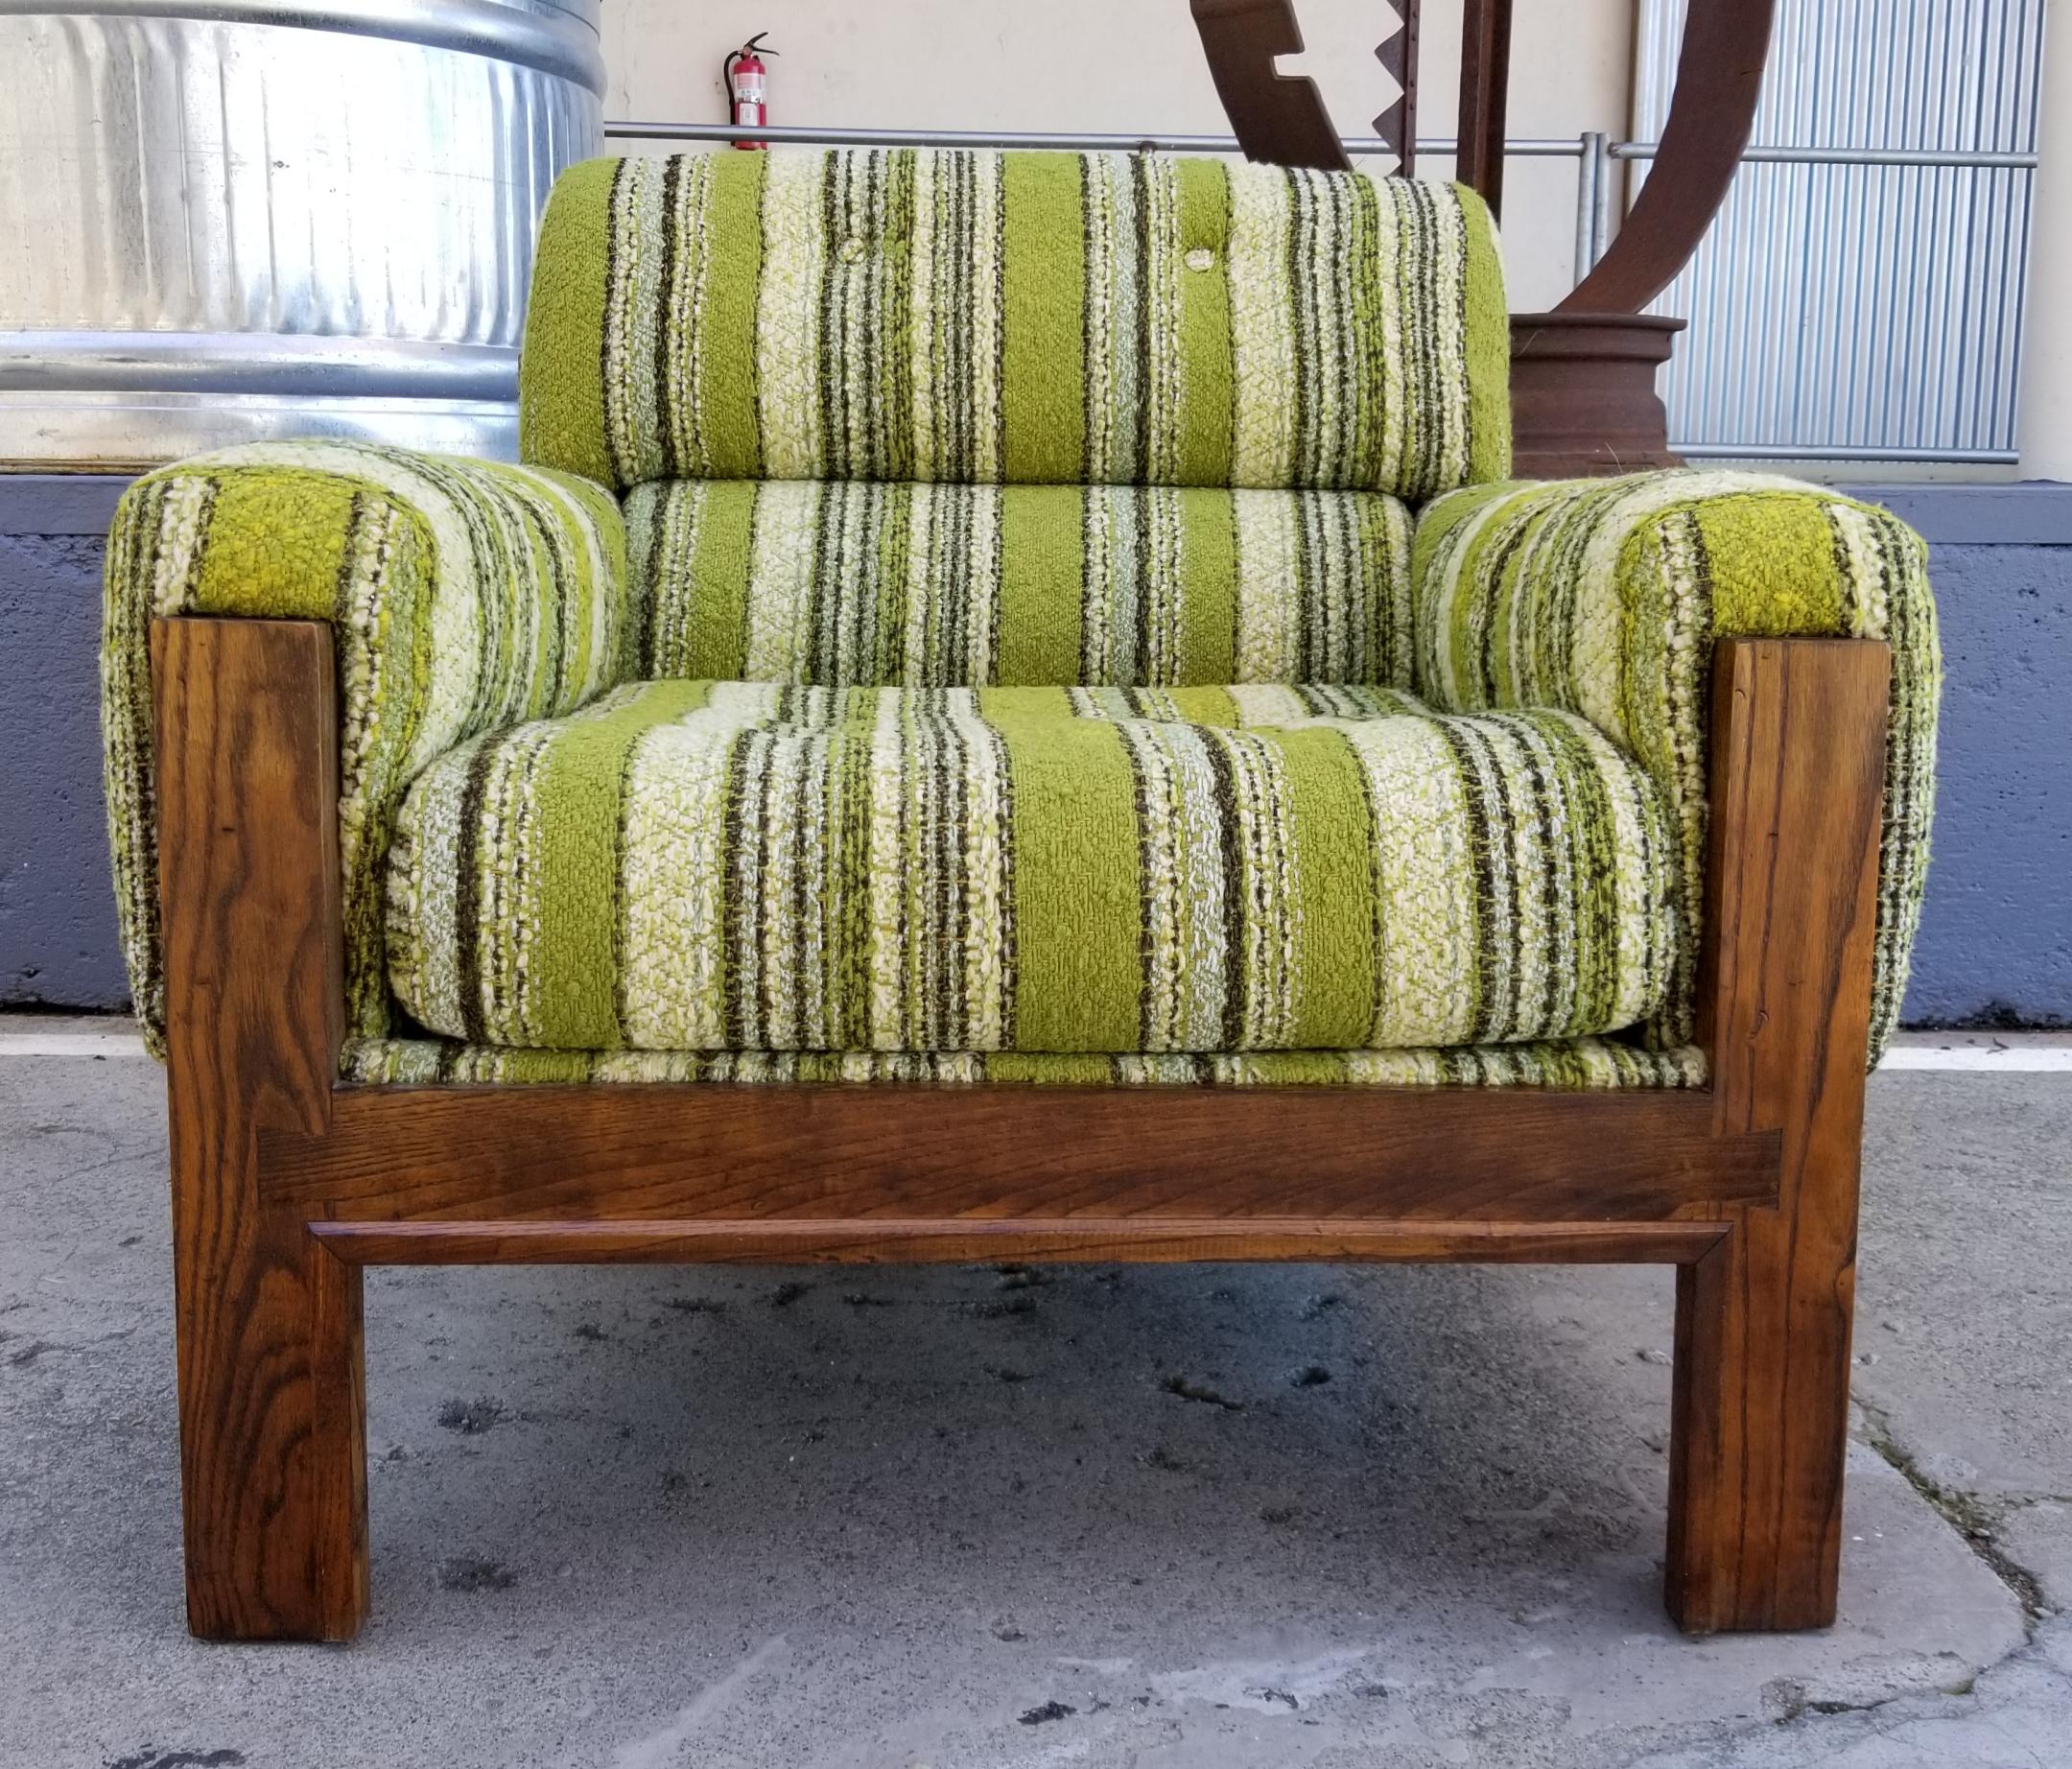 A Mid-Century Modern sofa and lounge chair set, circa 1970s. Amazing original condition! Vintage sets like this are extremely difficult to find in their original state, in this fine condition. Vibrant original green stripped upholstery, solid oak